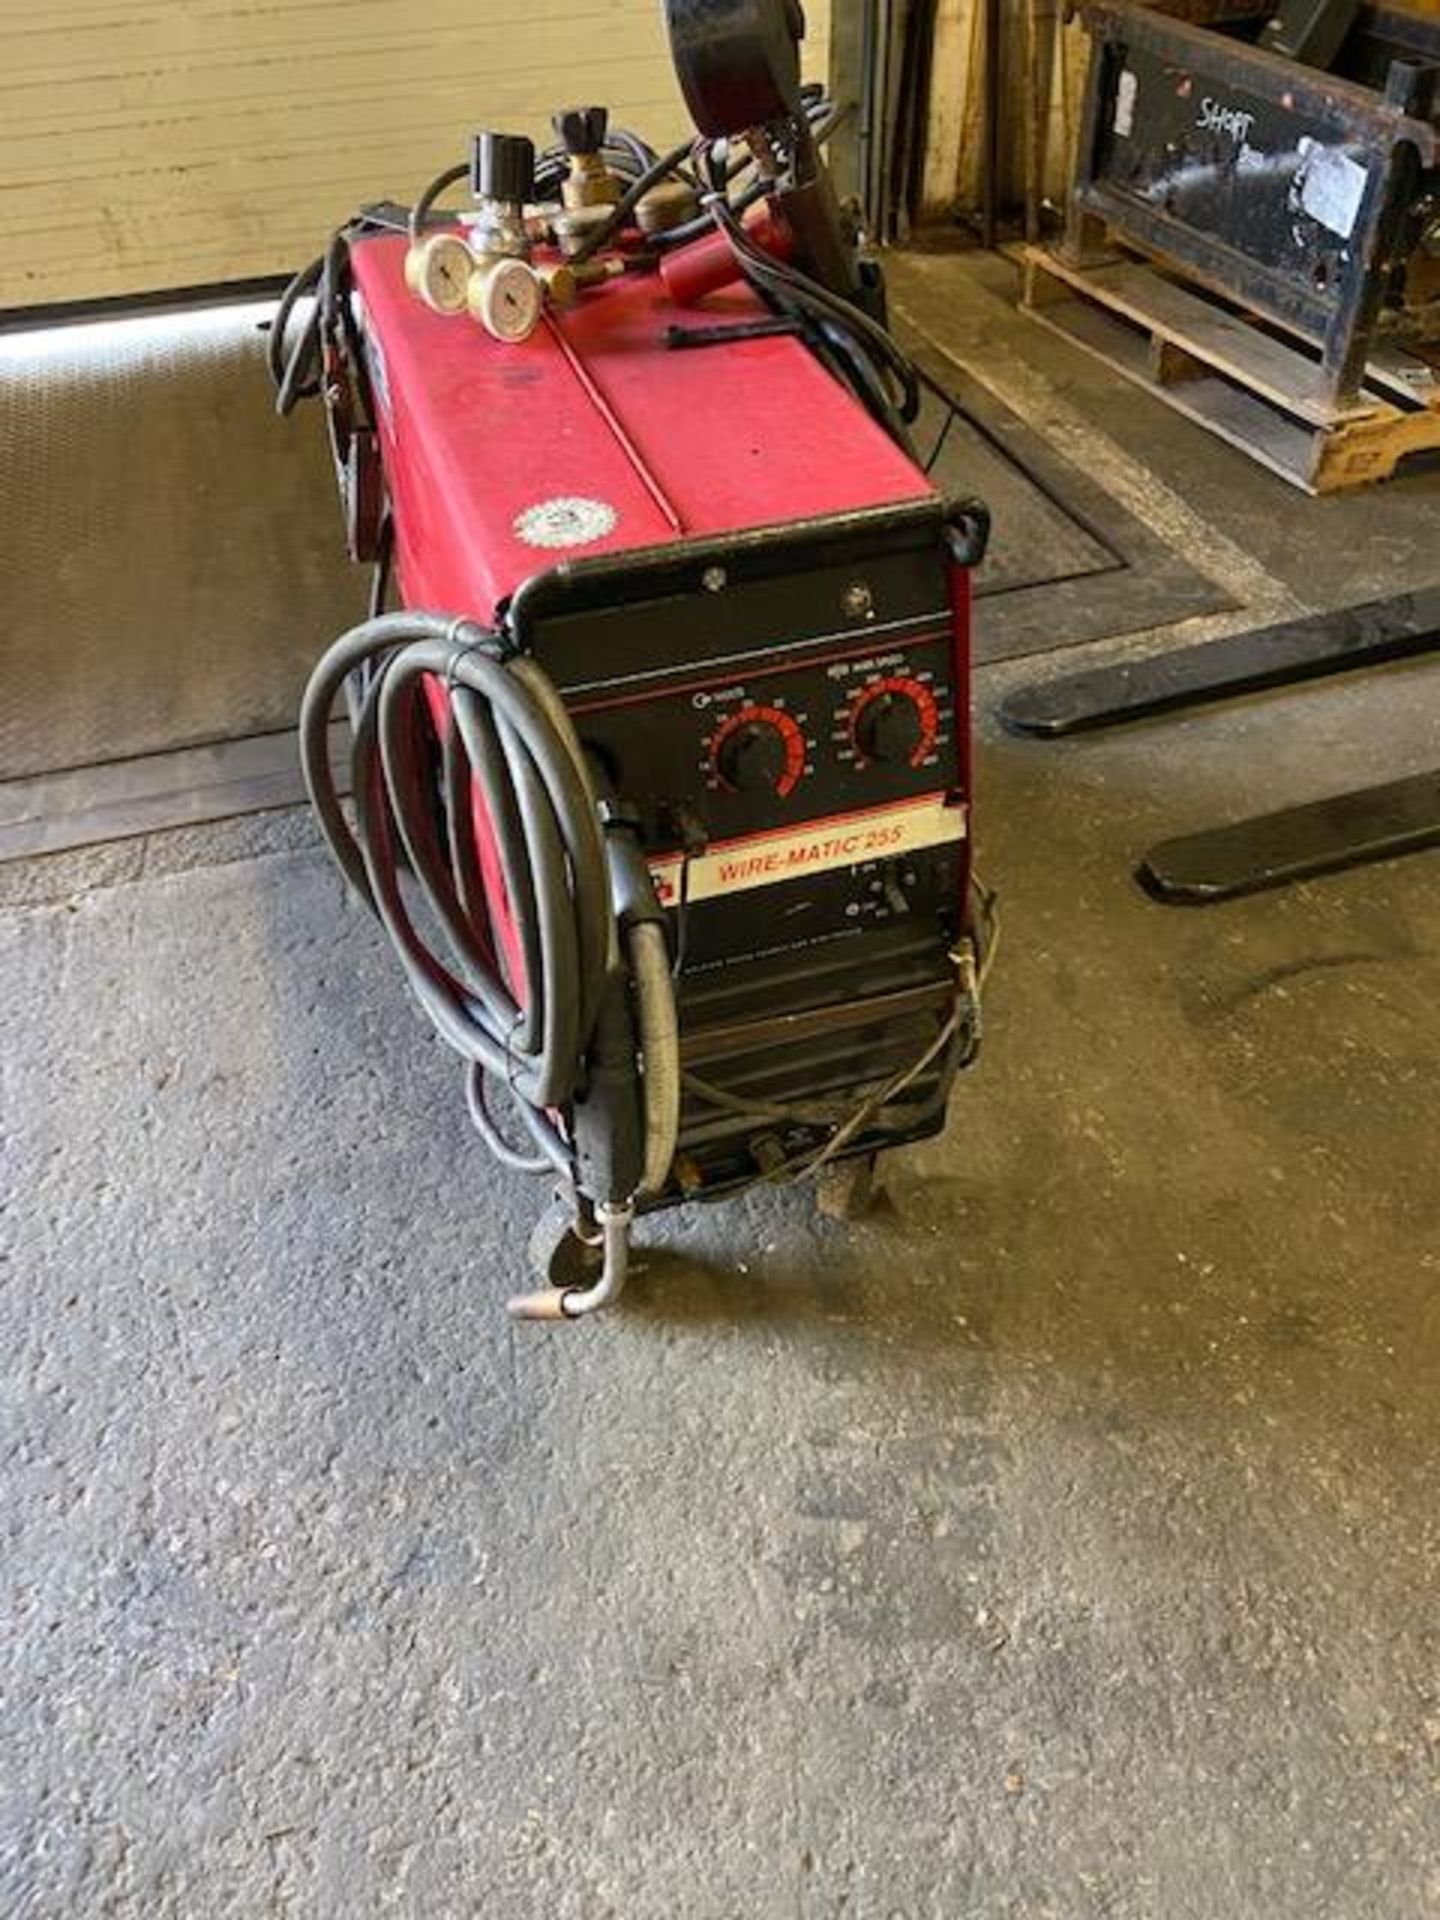 Lincoln Wire-Matic 255 Mig Welder Unit with Mig Gun and gauges complete with Aluminum Spool Gun - Image 2 of 3